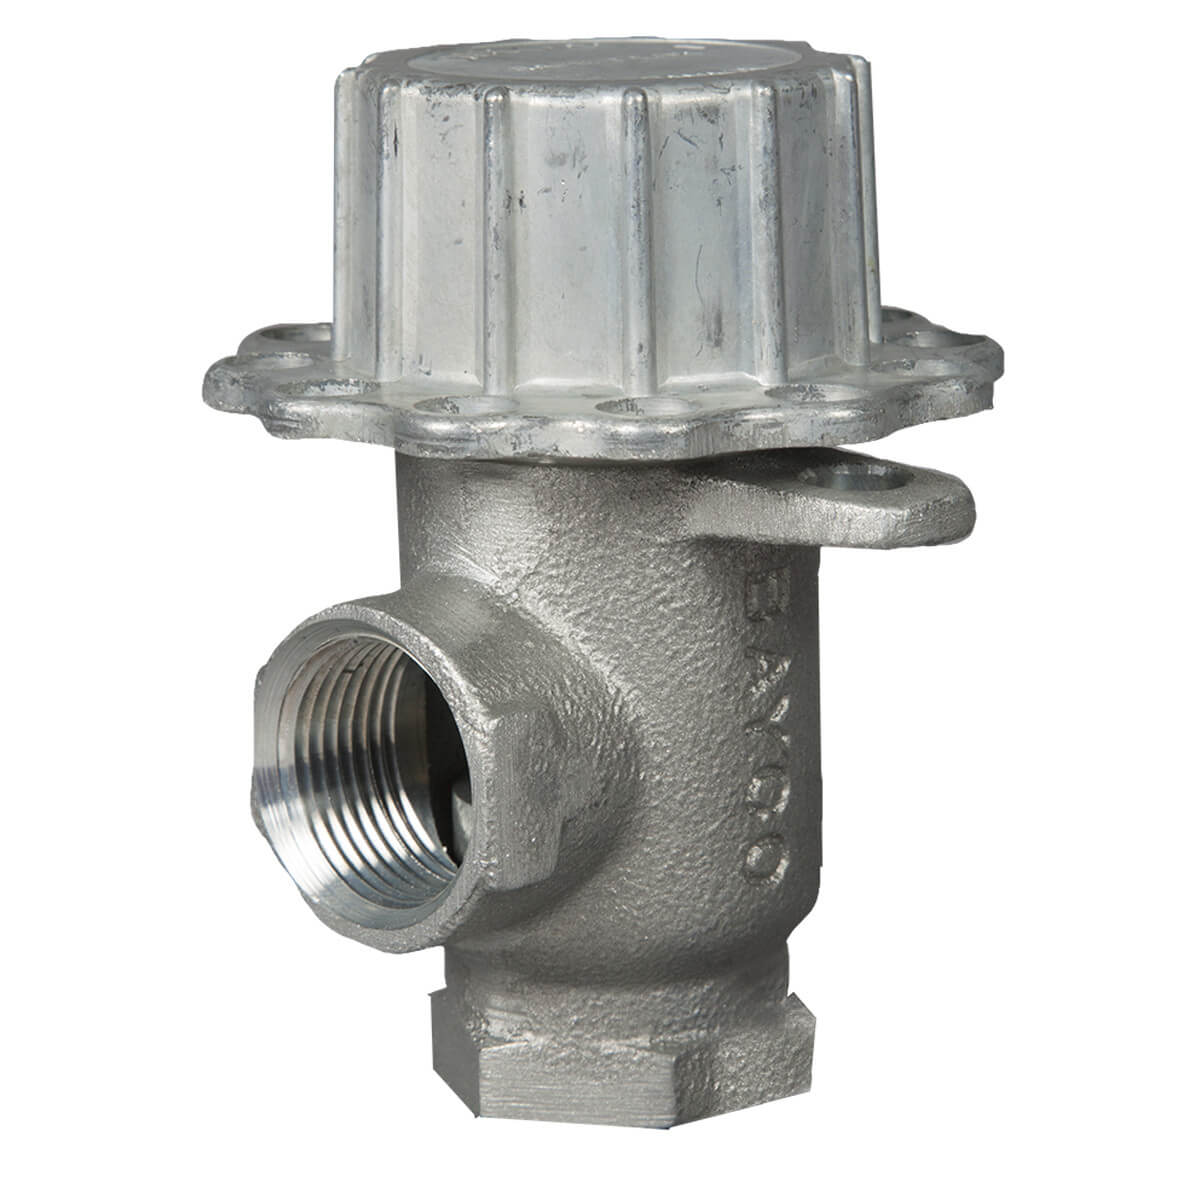 Fuel Angle Lock Valve - 1-in